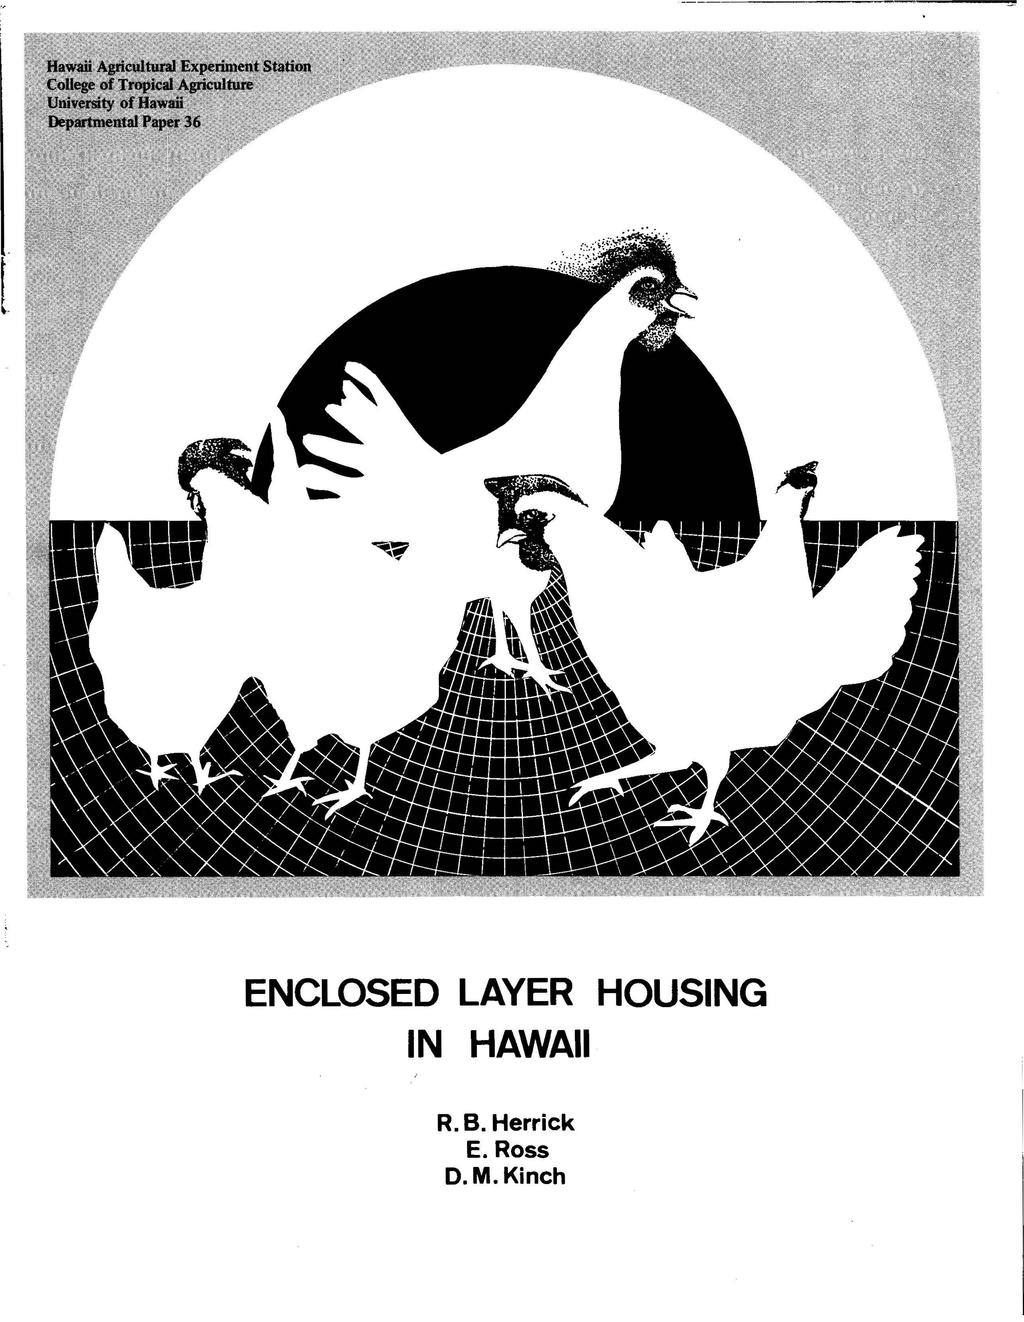 ENCLOSED LAYER HOUSING IN HAWAII